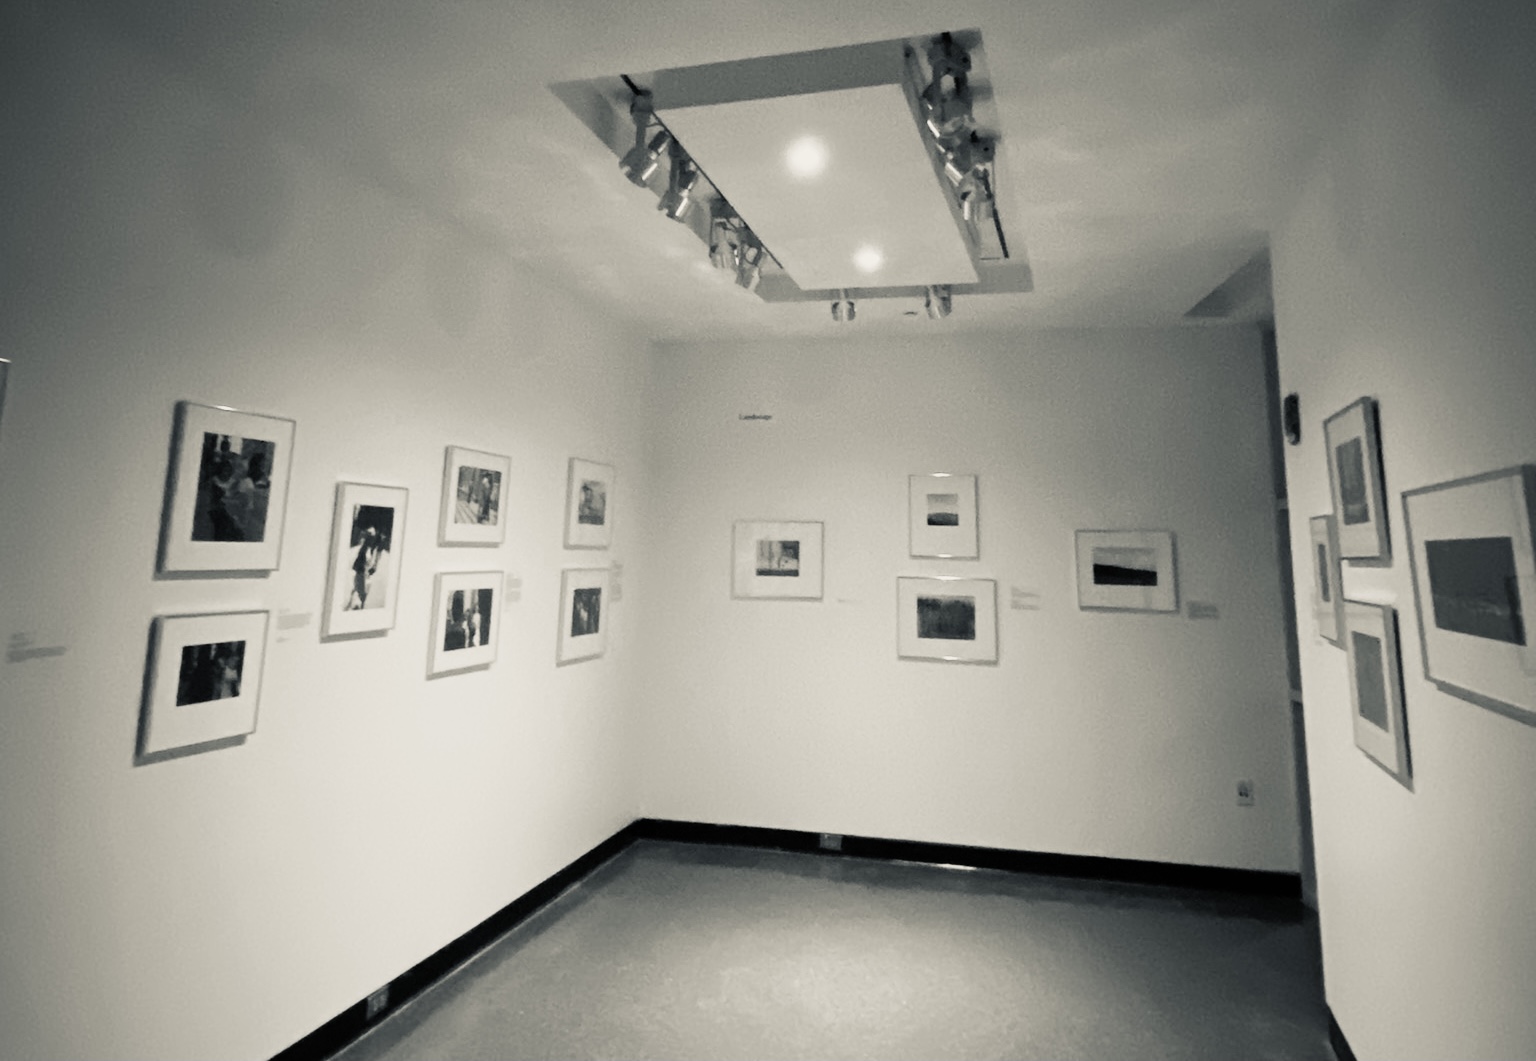 installtion view of gallery showing multiple black and white framed photographs